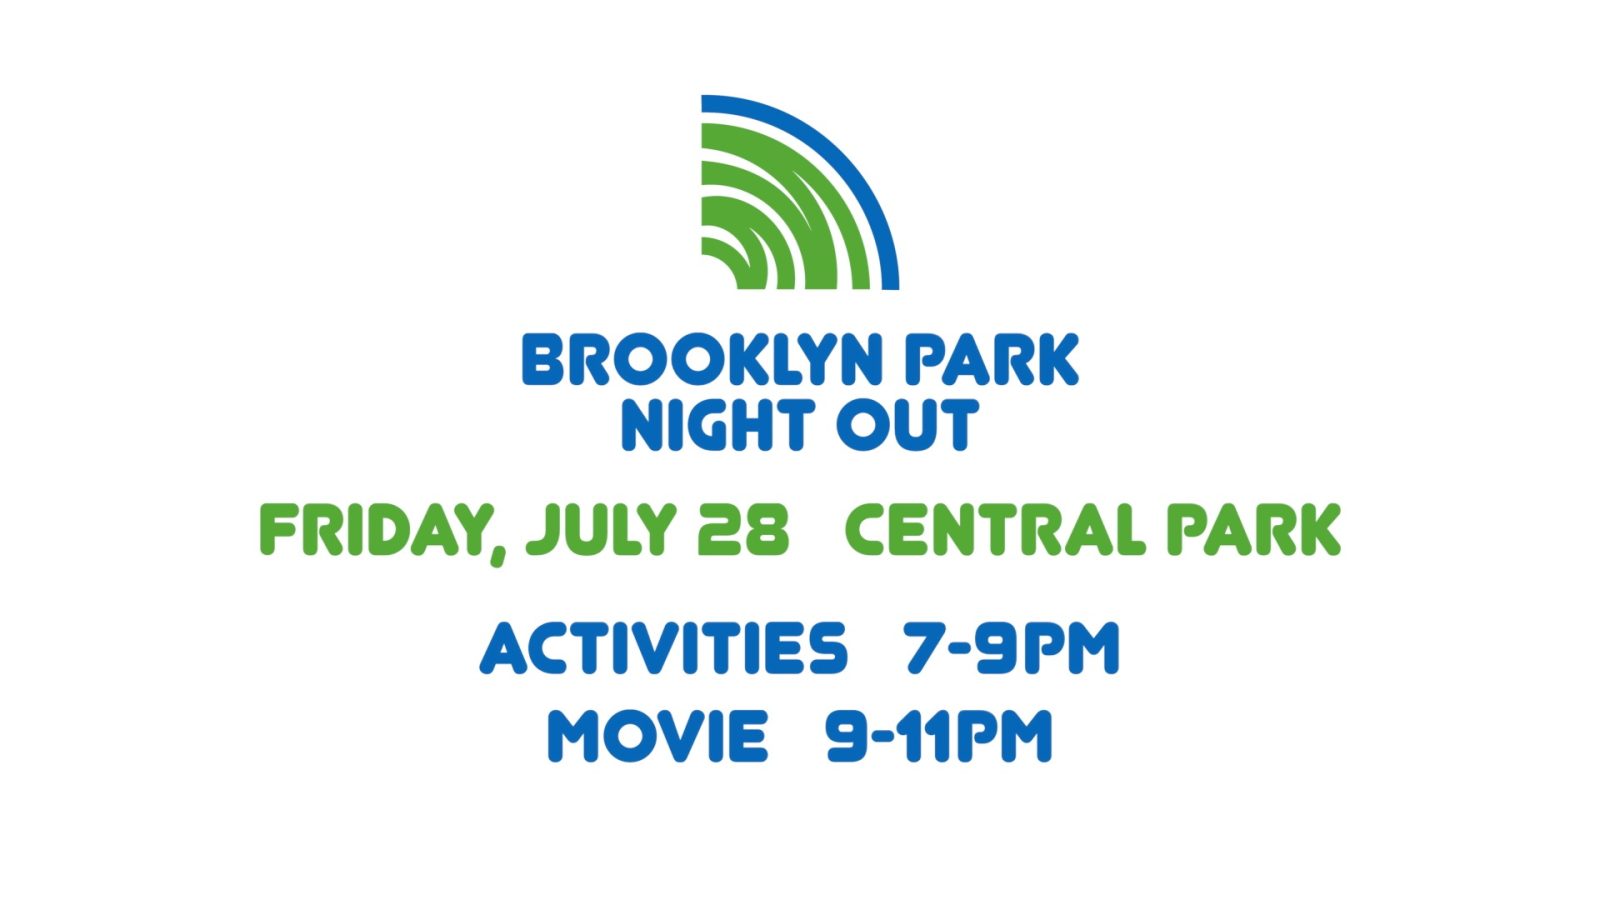 Brooklyn Park Night Out date and times